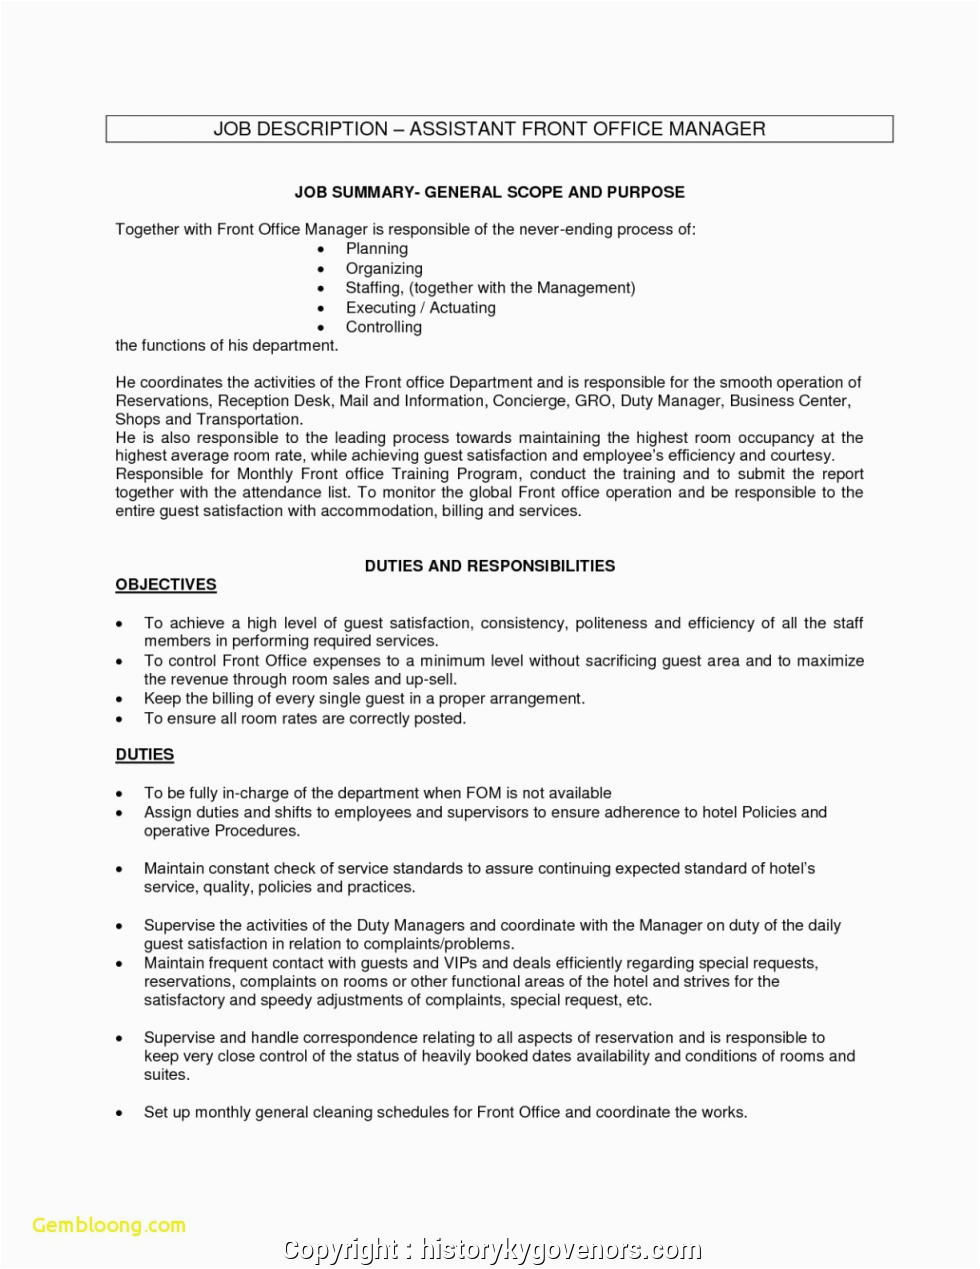 Sample Resume for Duty Manager Position Professional Front Fice Duty Manager Resume Sample 28